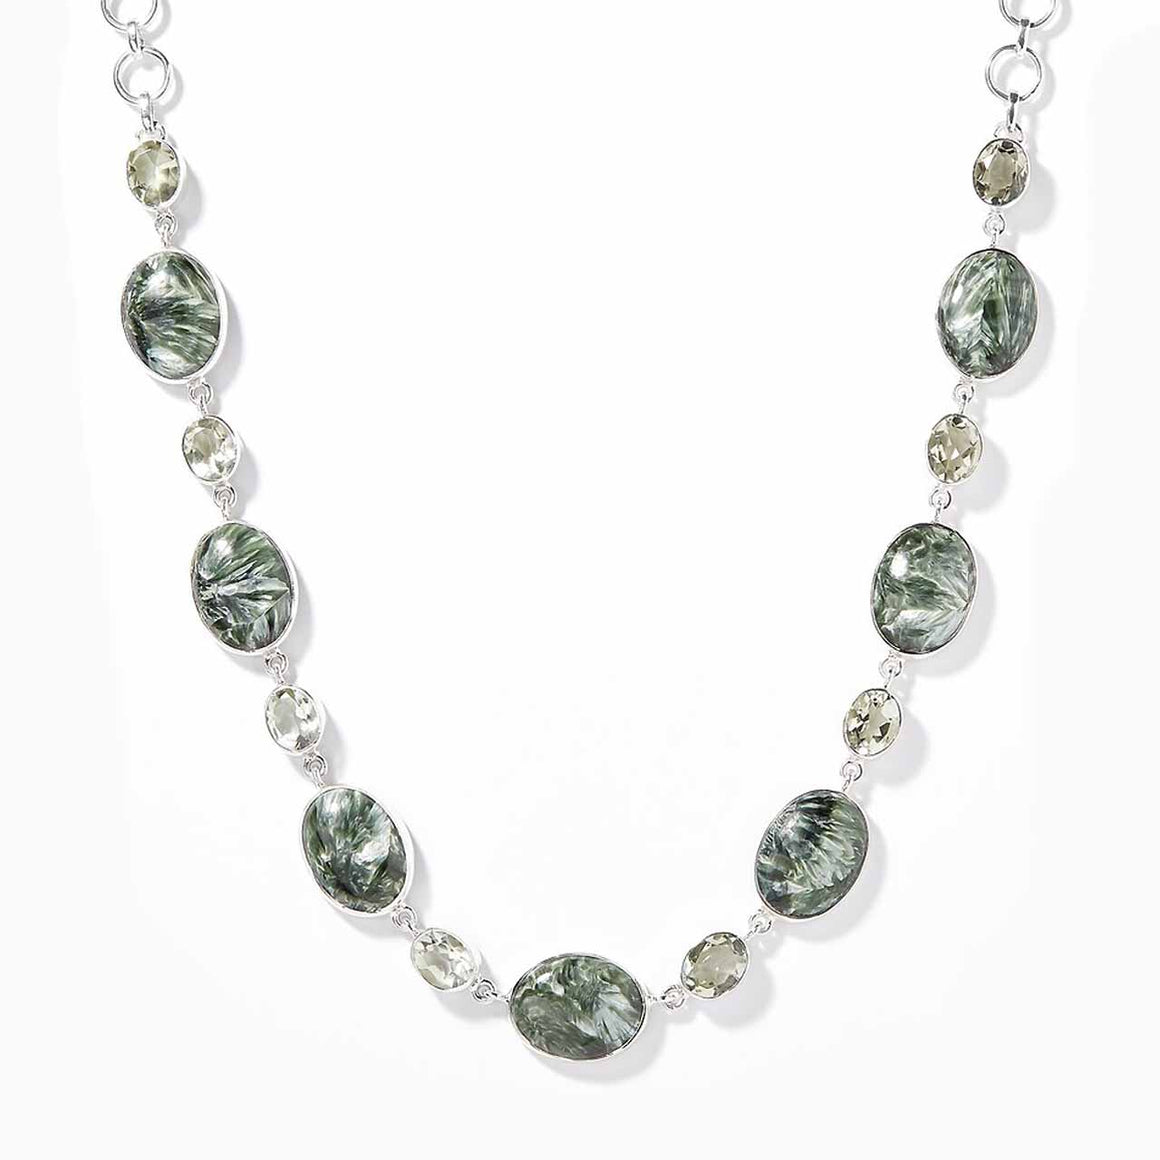 Seraphinite and Green Amethyst Gemstone Necklace